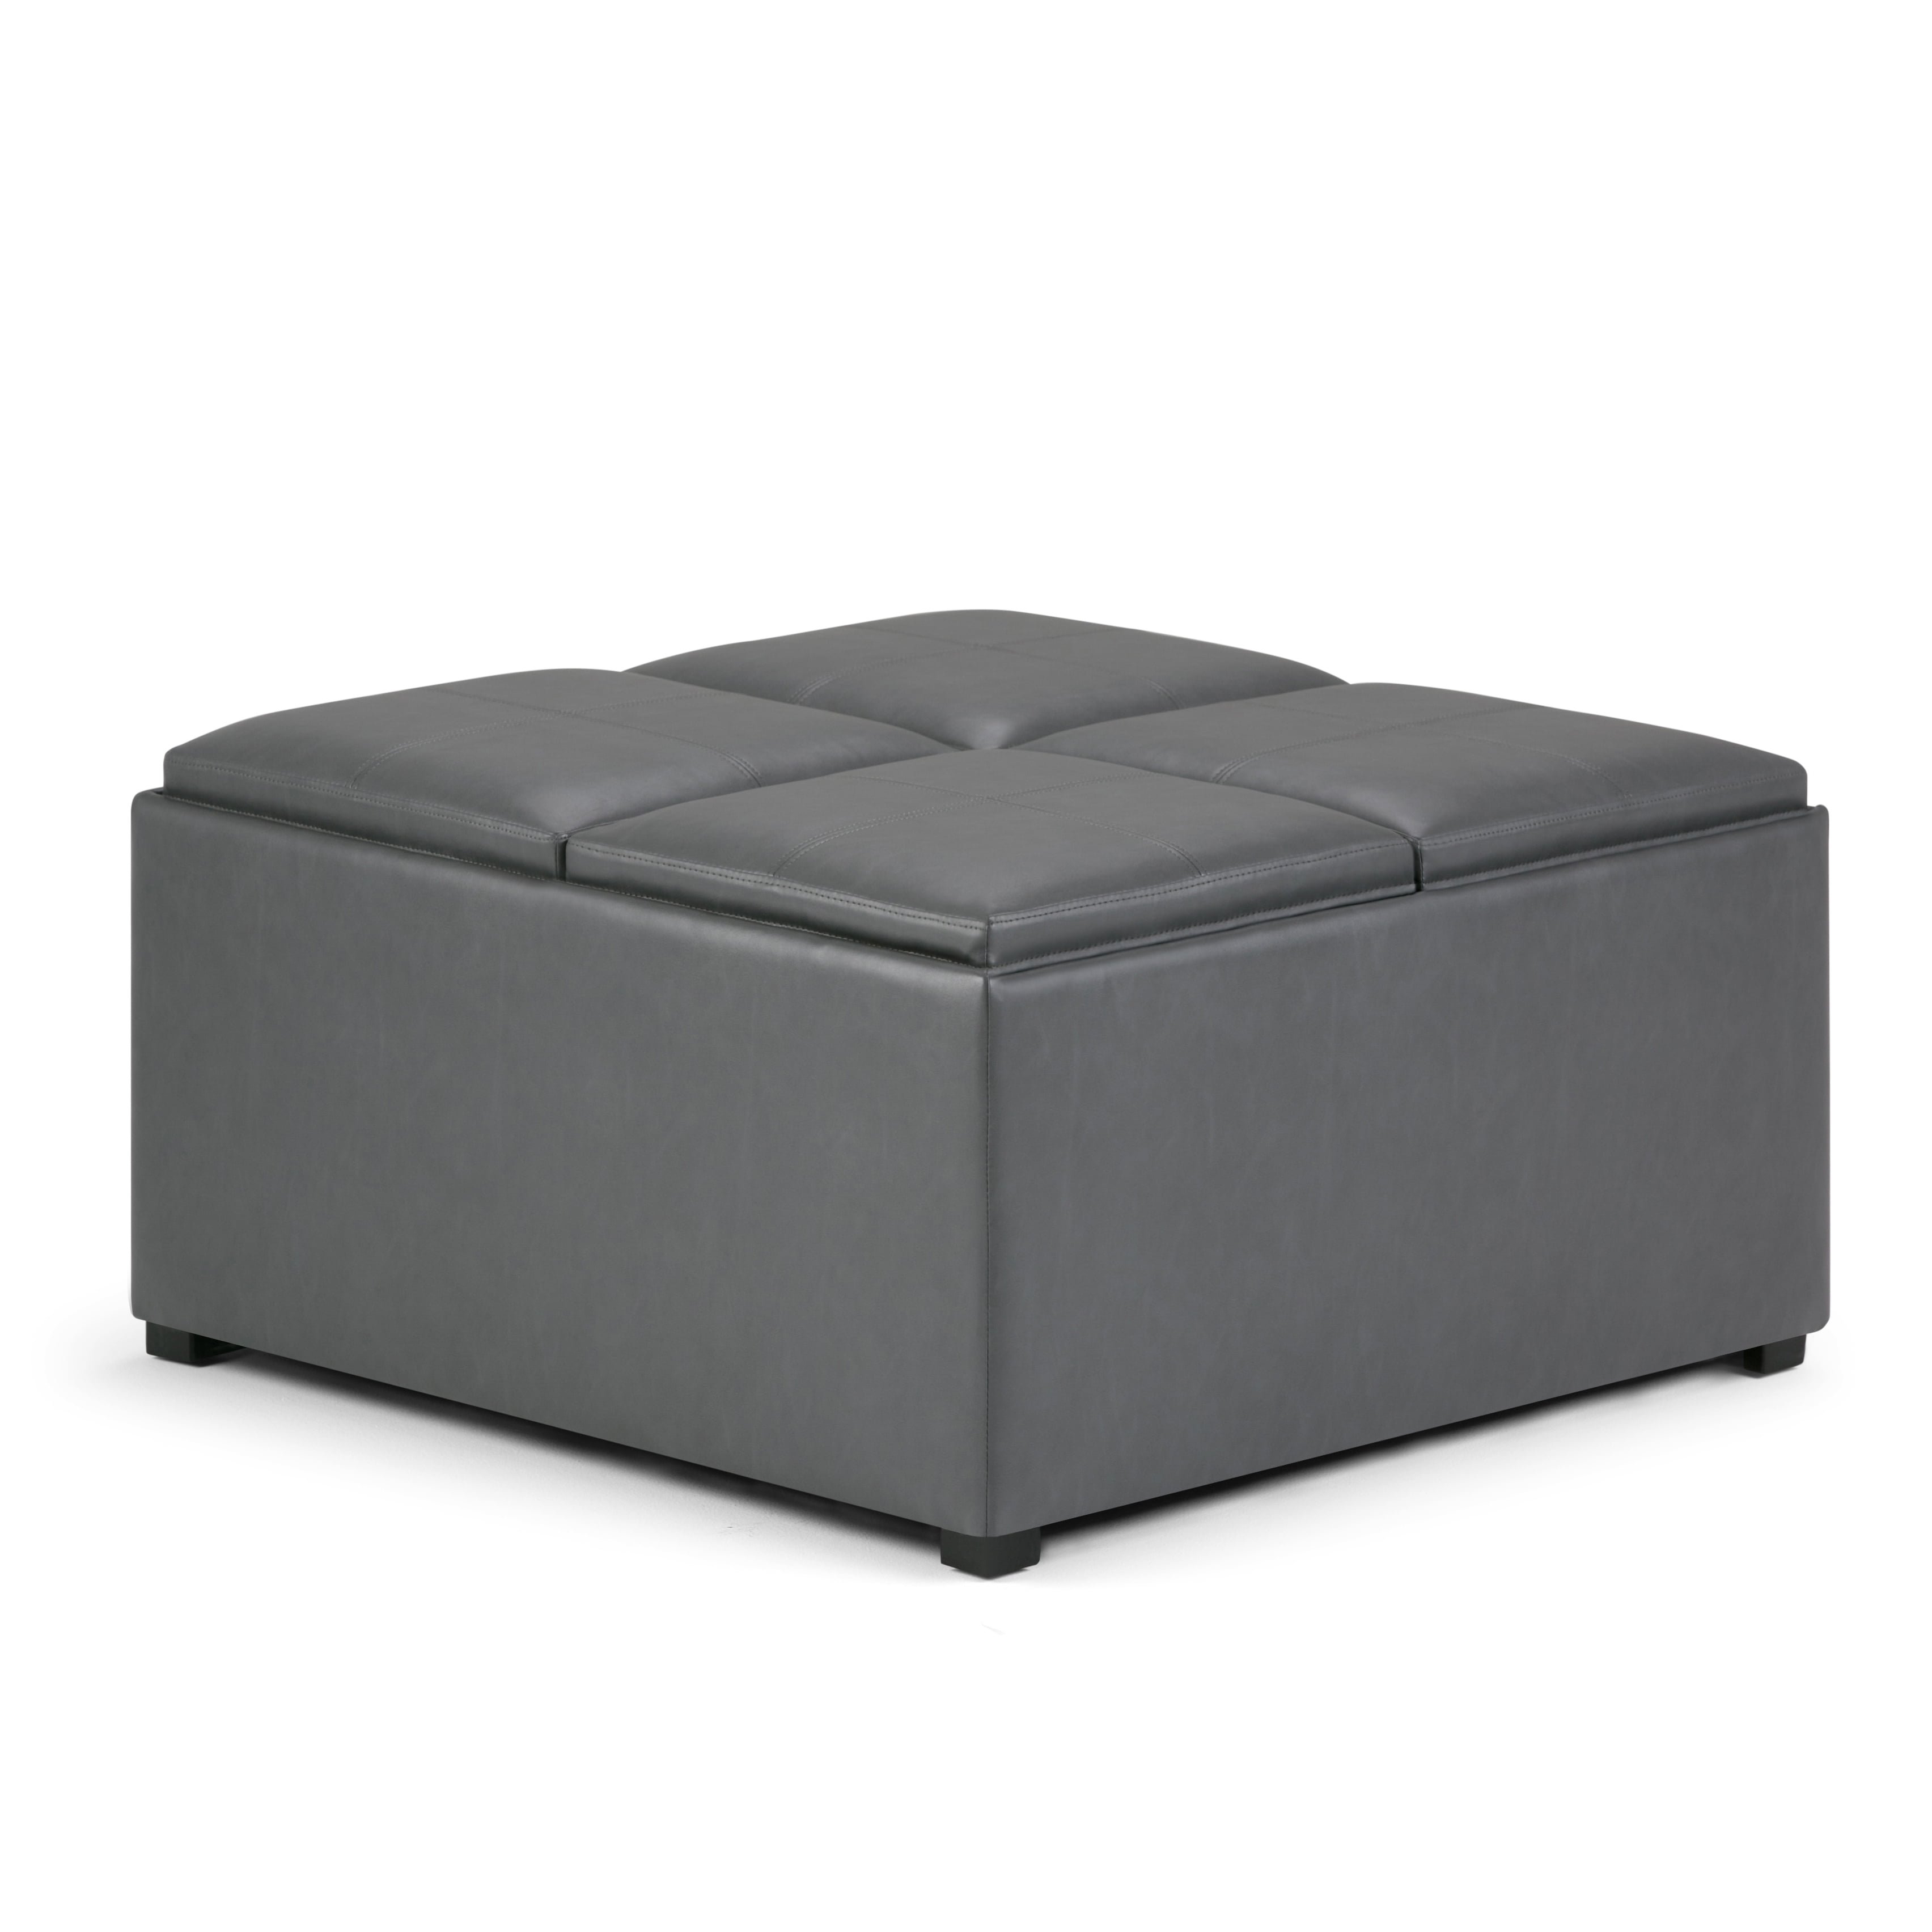 Contemporary Cocktail Footrest Stool in Upholstered Midnight Black Faux Leather for the Living Room SIMPLIHOME Avalon 35 inch Wide Square Coffee Table Lift Top Storage Ottoman